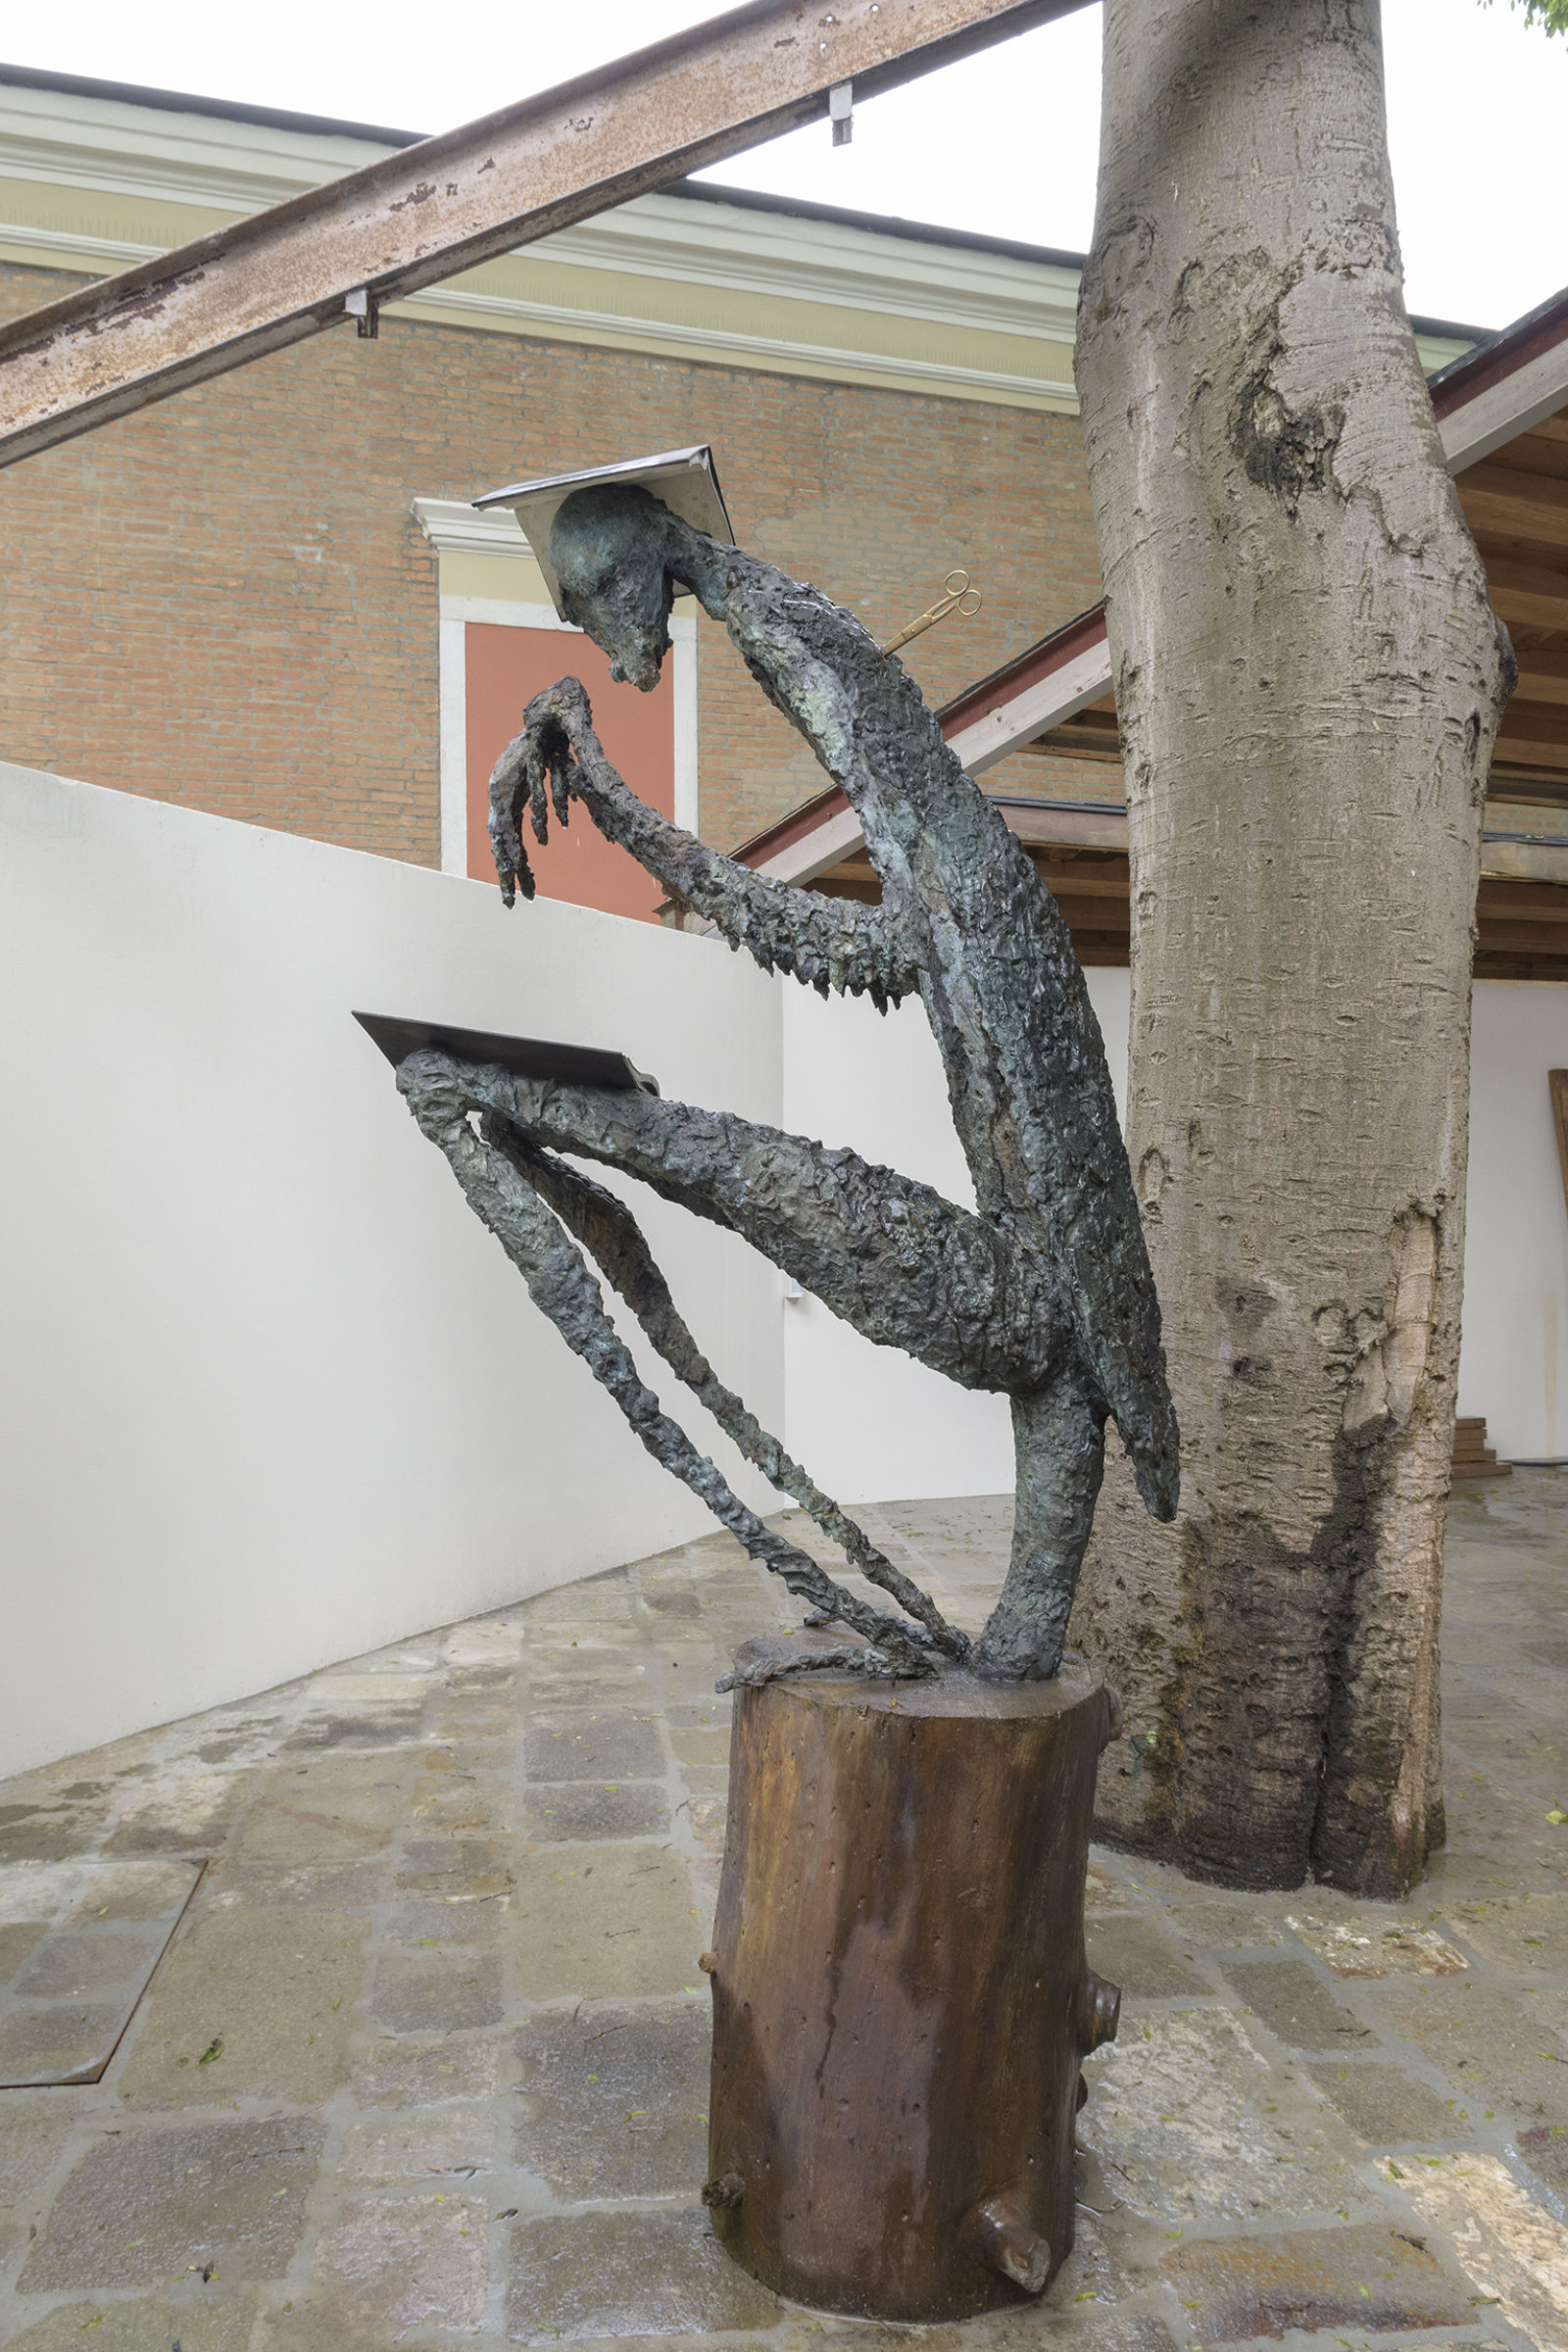 Geoffrey Farmer, Praying Mantis, 2017, cast bronze, waterworks, 97 x 35 x 48 in. (246 x 88 x 123 cm). Installation view, A way out of the mirror, Canada Pavilion, 57th Venice Biennale, Venice, Italy